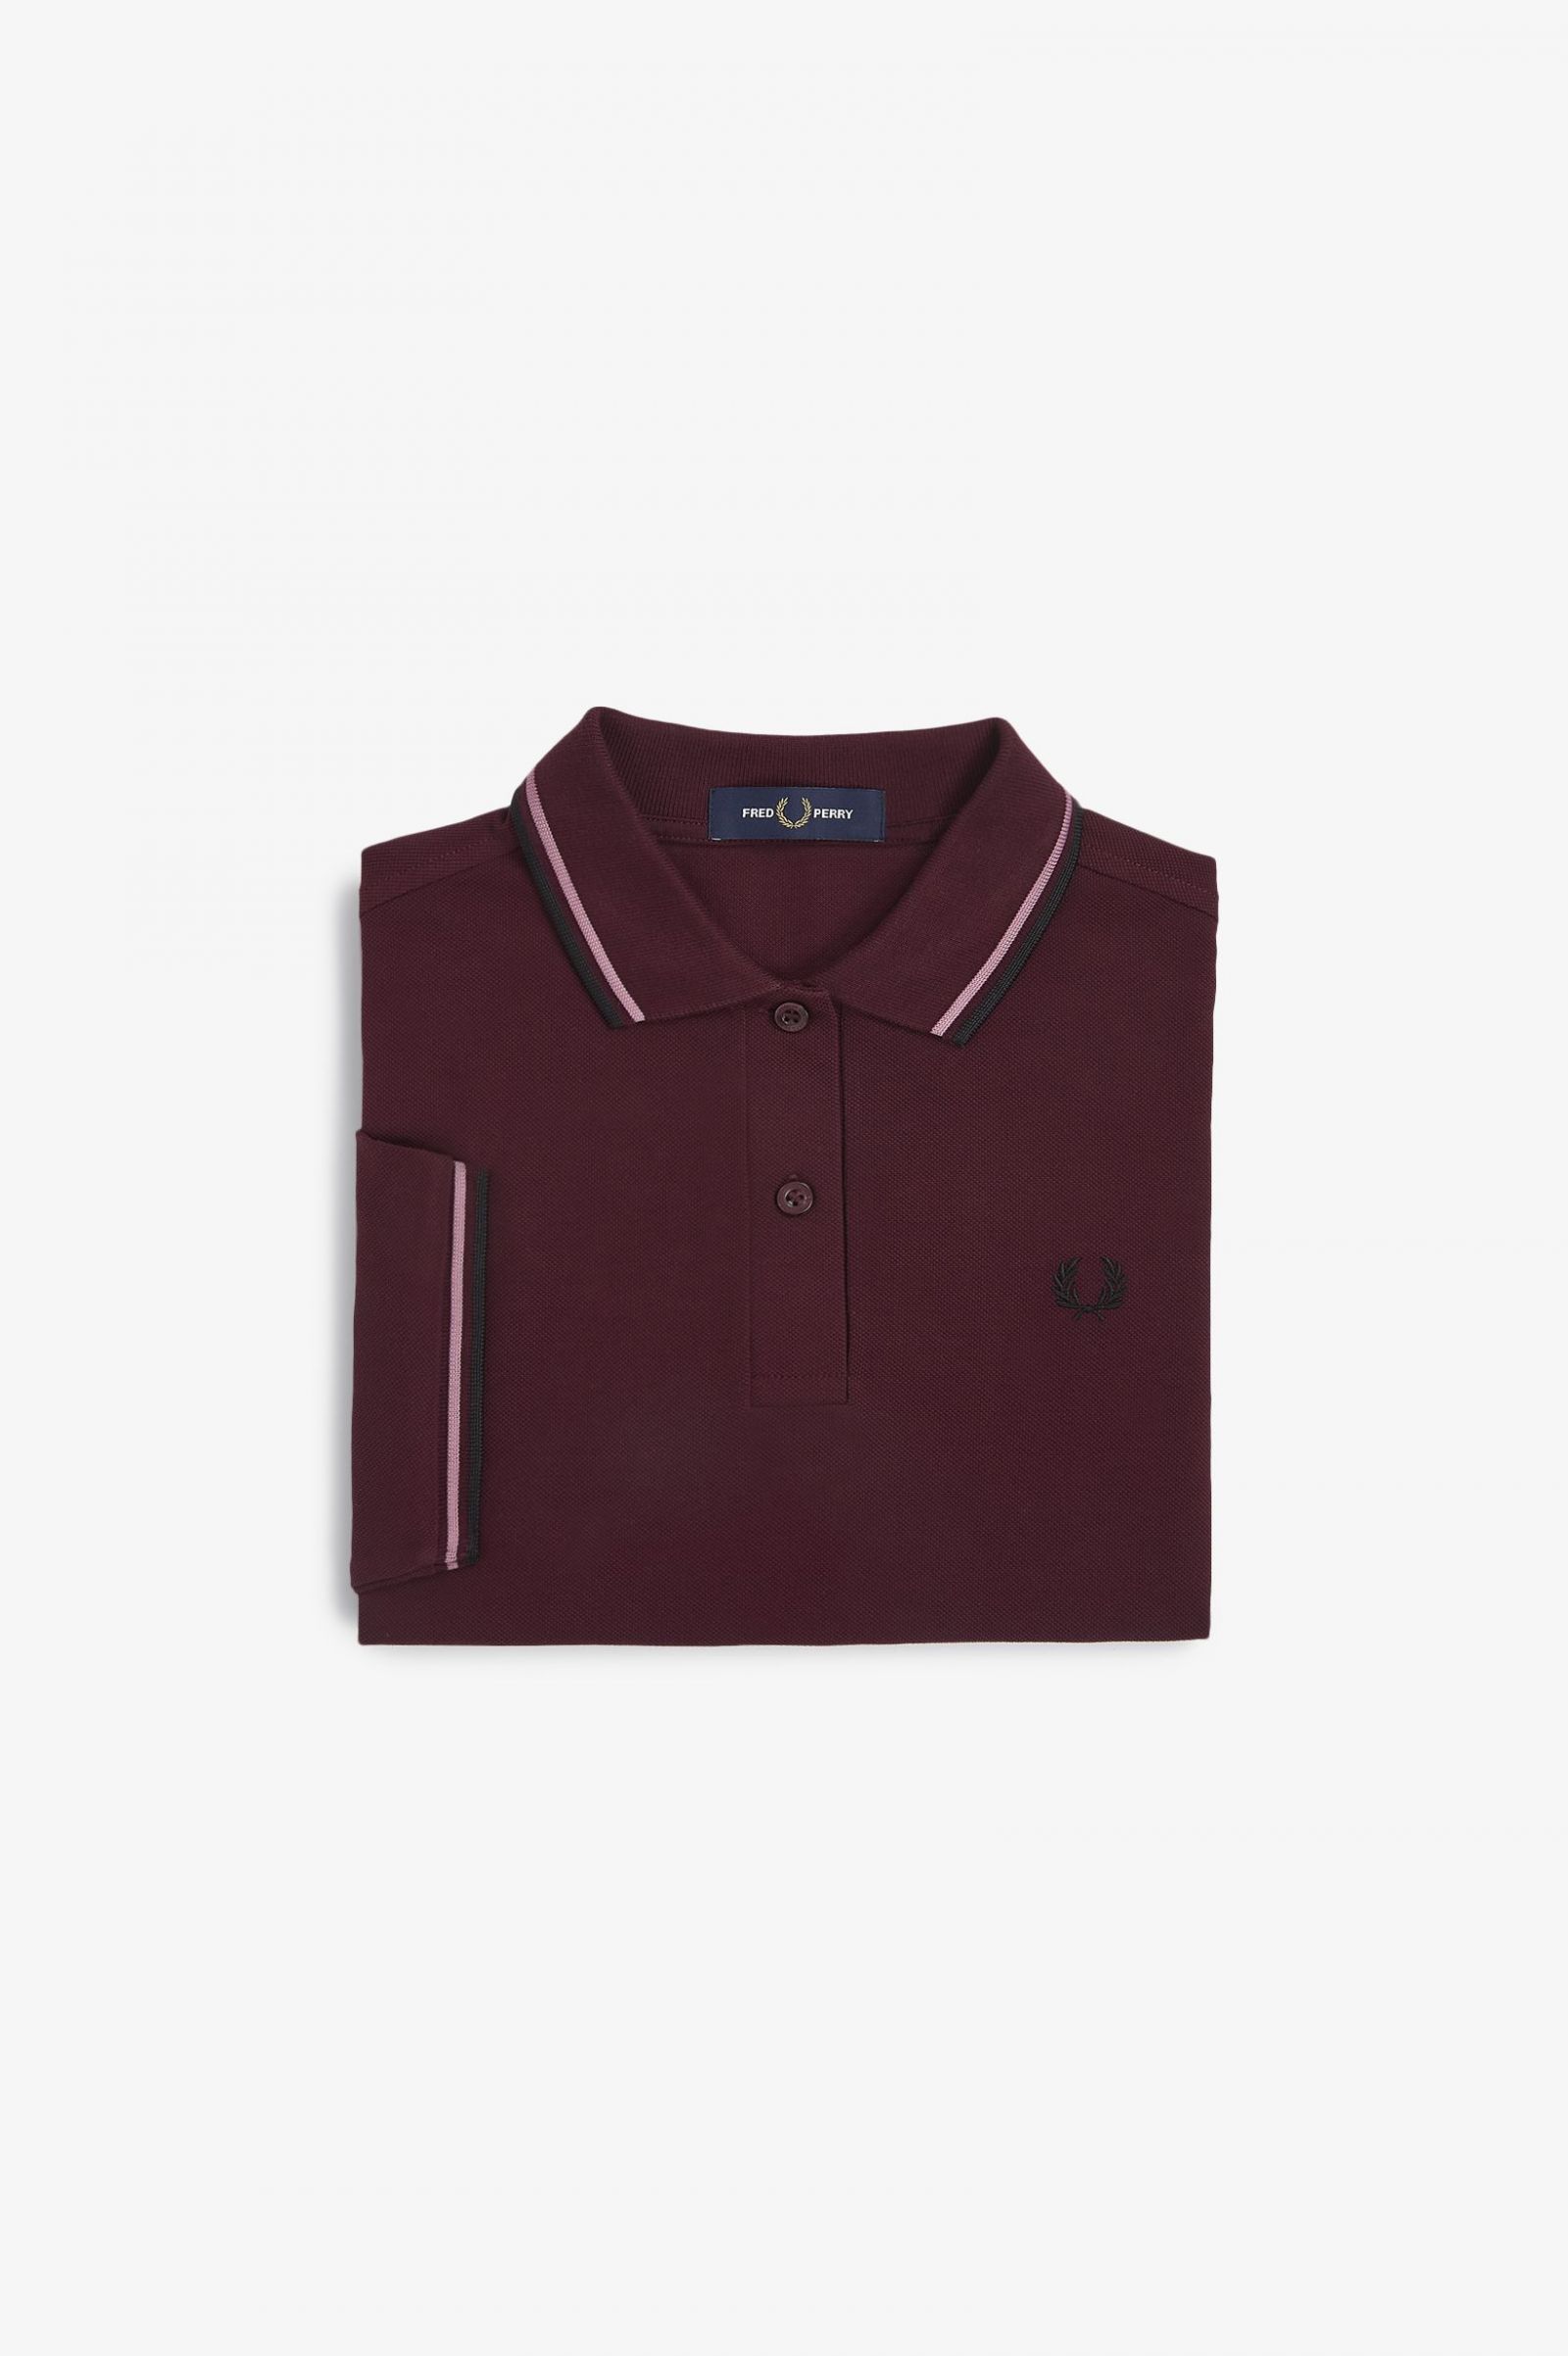 G3600 - Oxblood / Dusty Rose Pink / Black | The Fred Perry Shirt